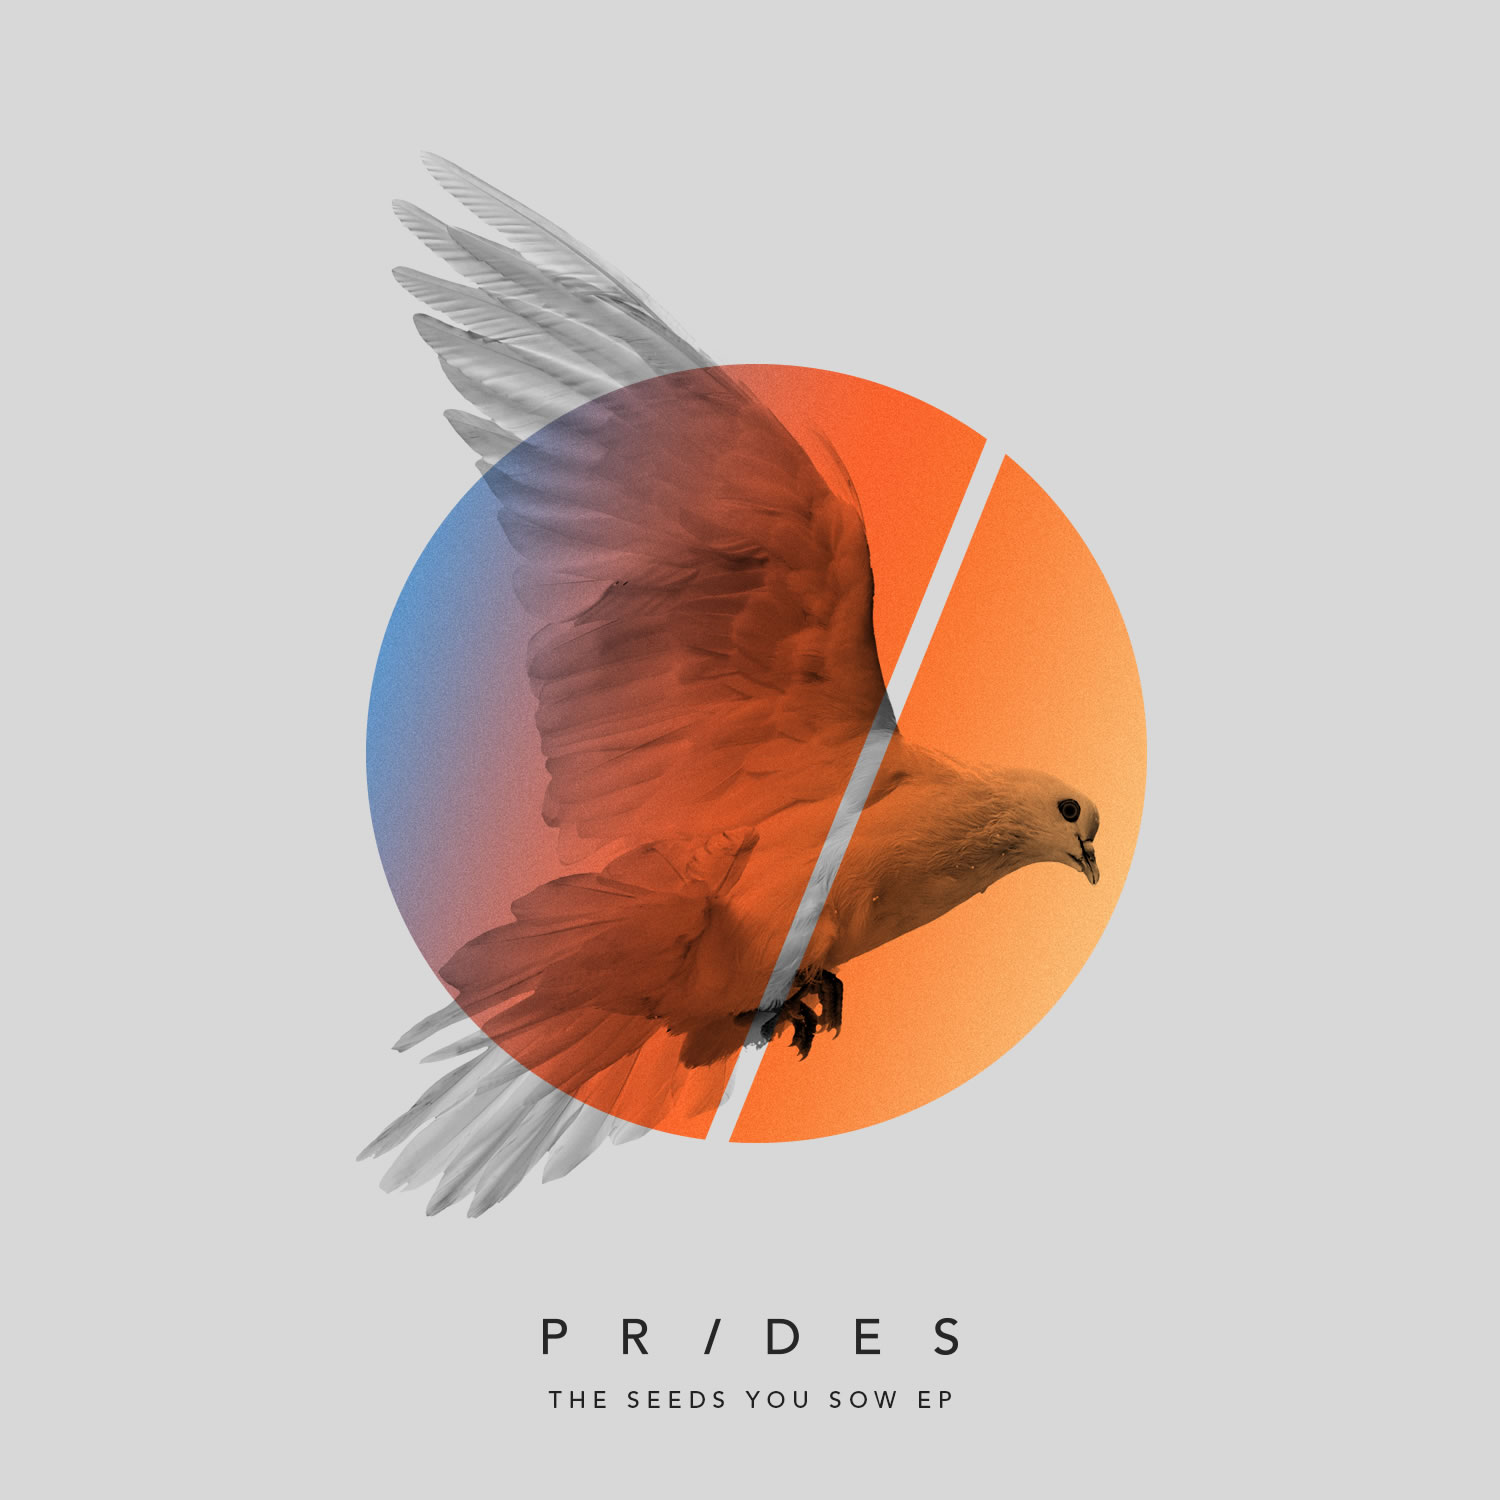 Prides-The-Seeds-You-Sow-EP-ART.jpg